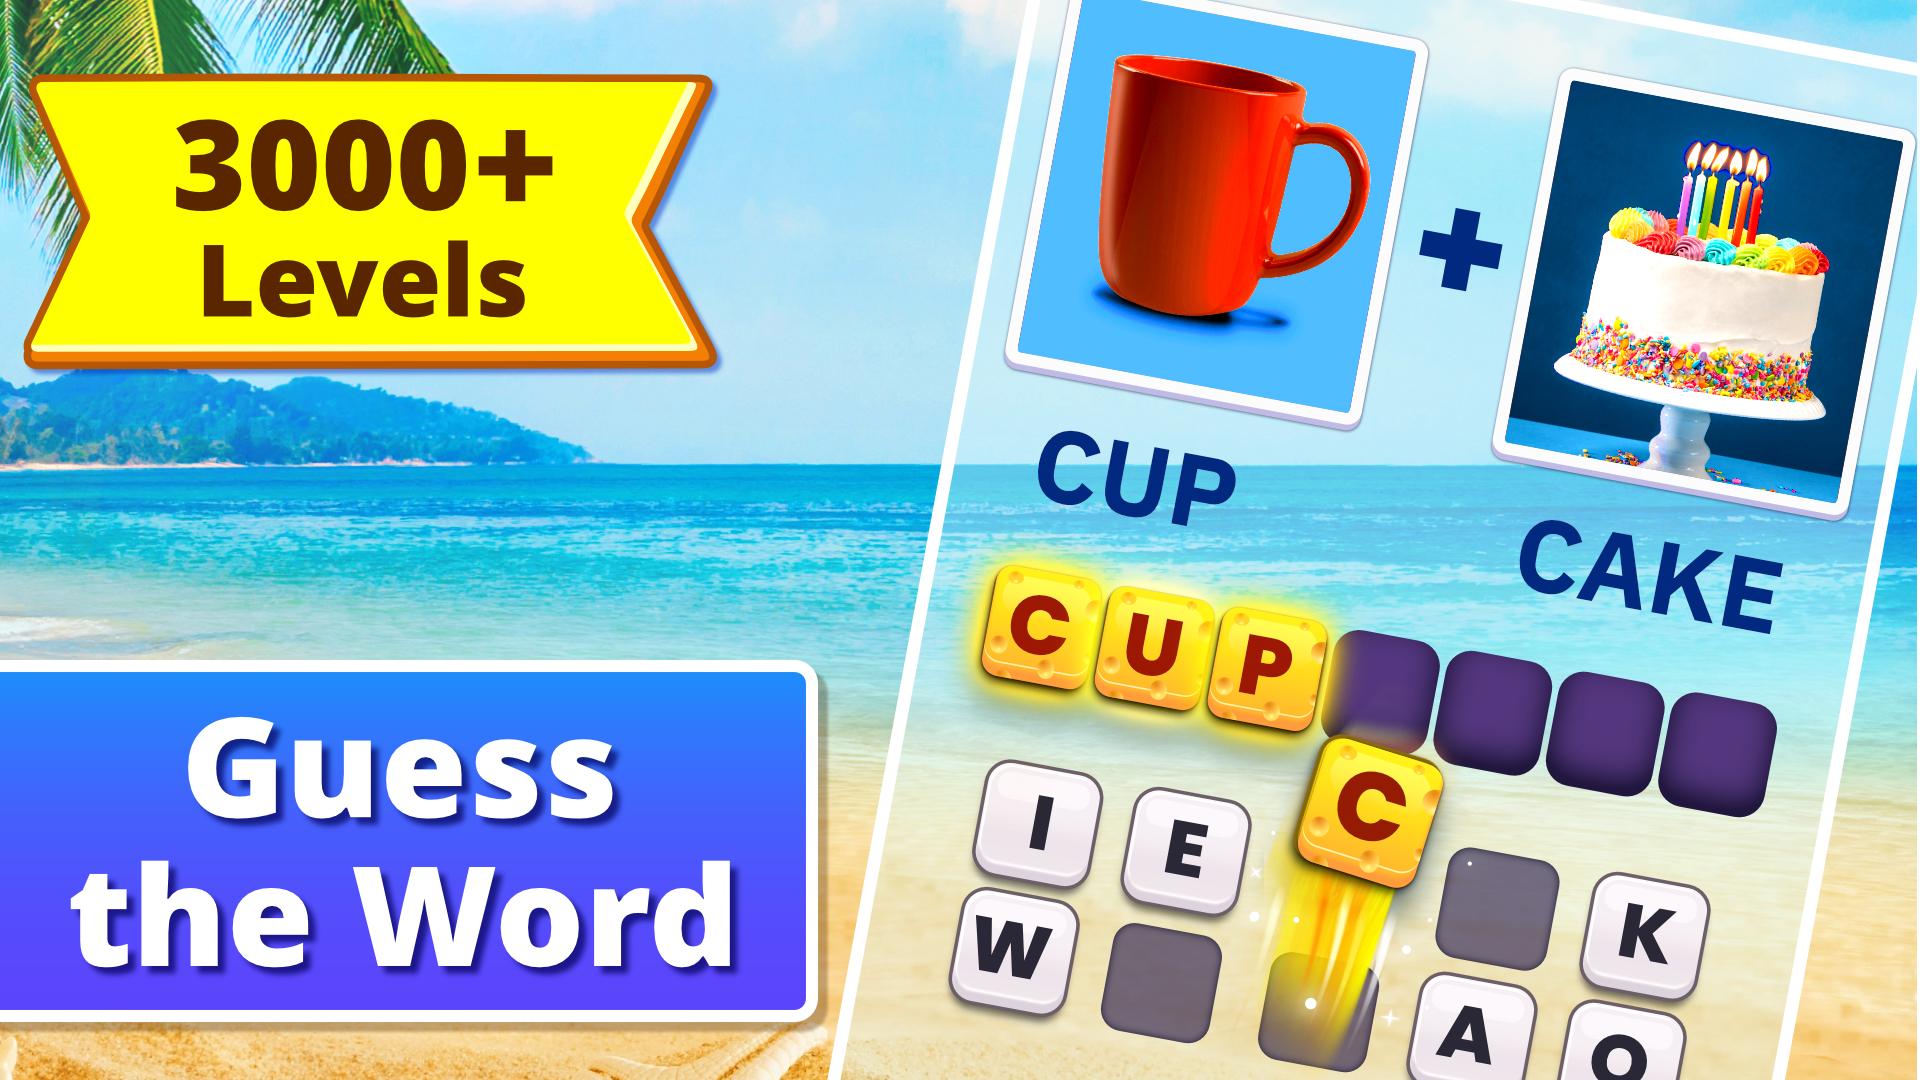 Wordgames com game 4 pics 1 word. Игра слов. Word pic. Loaker вафли ответы к игре zoomquiz. Words with pictures the Word like.